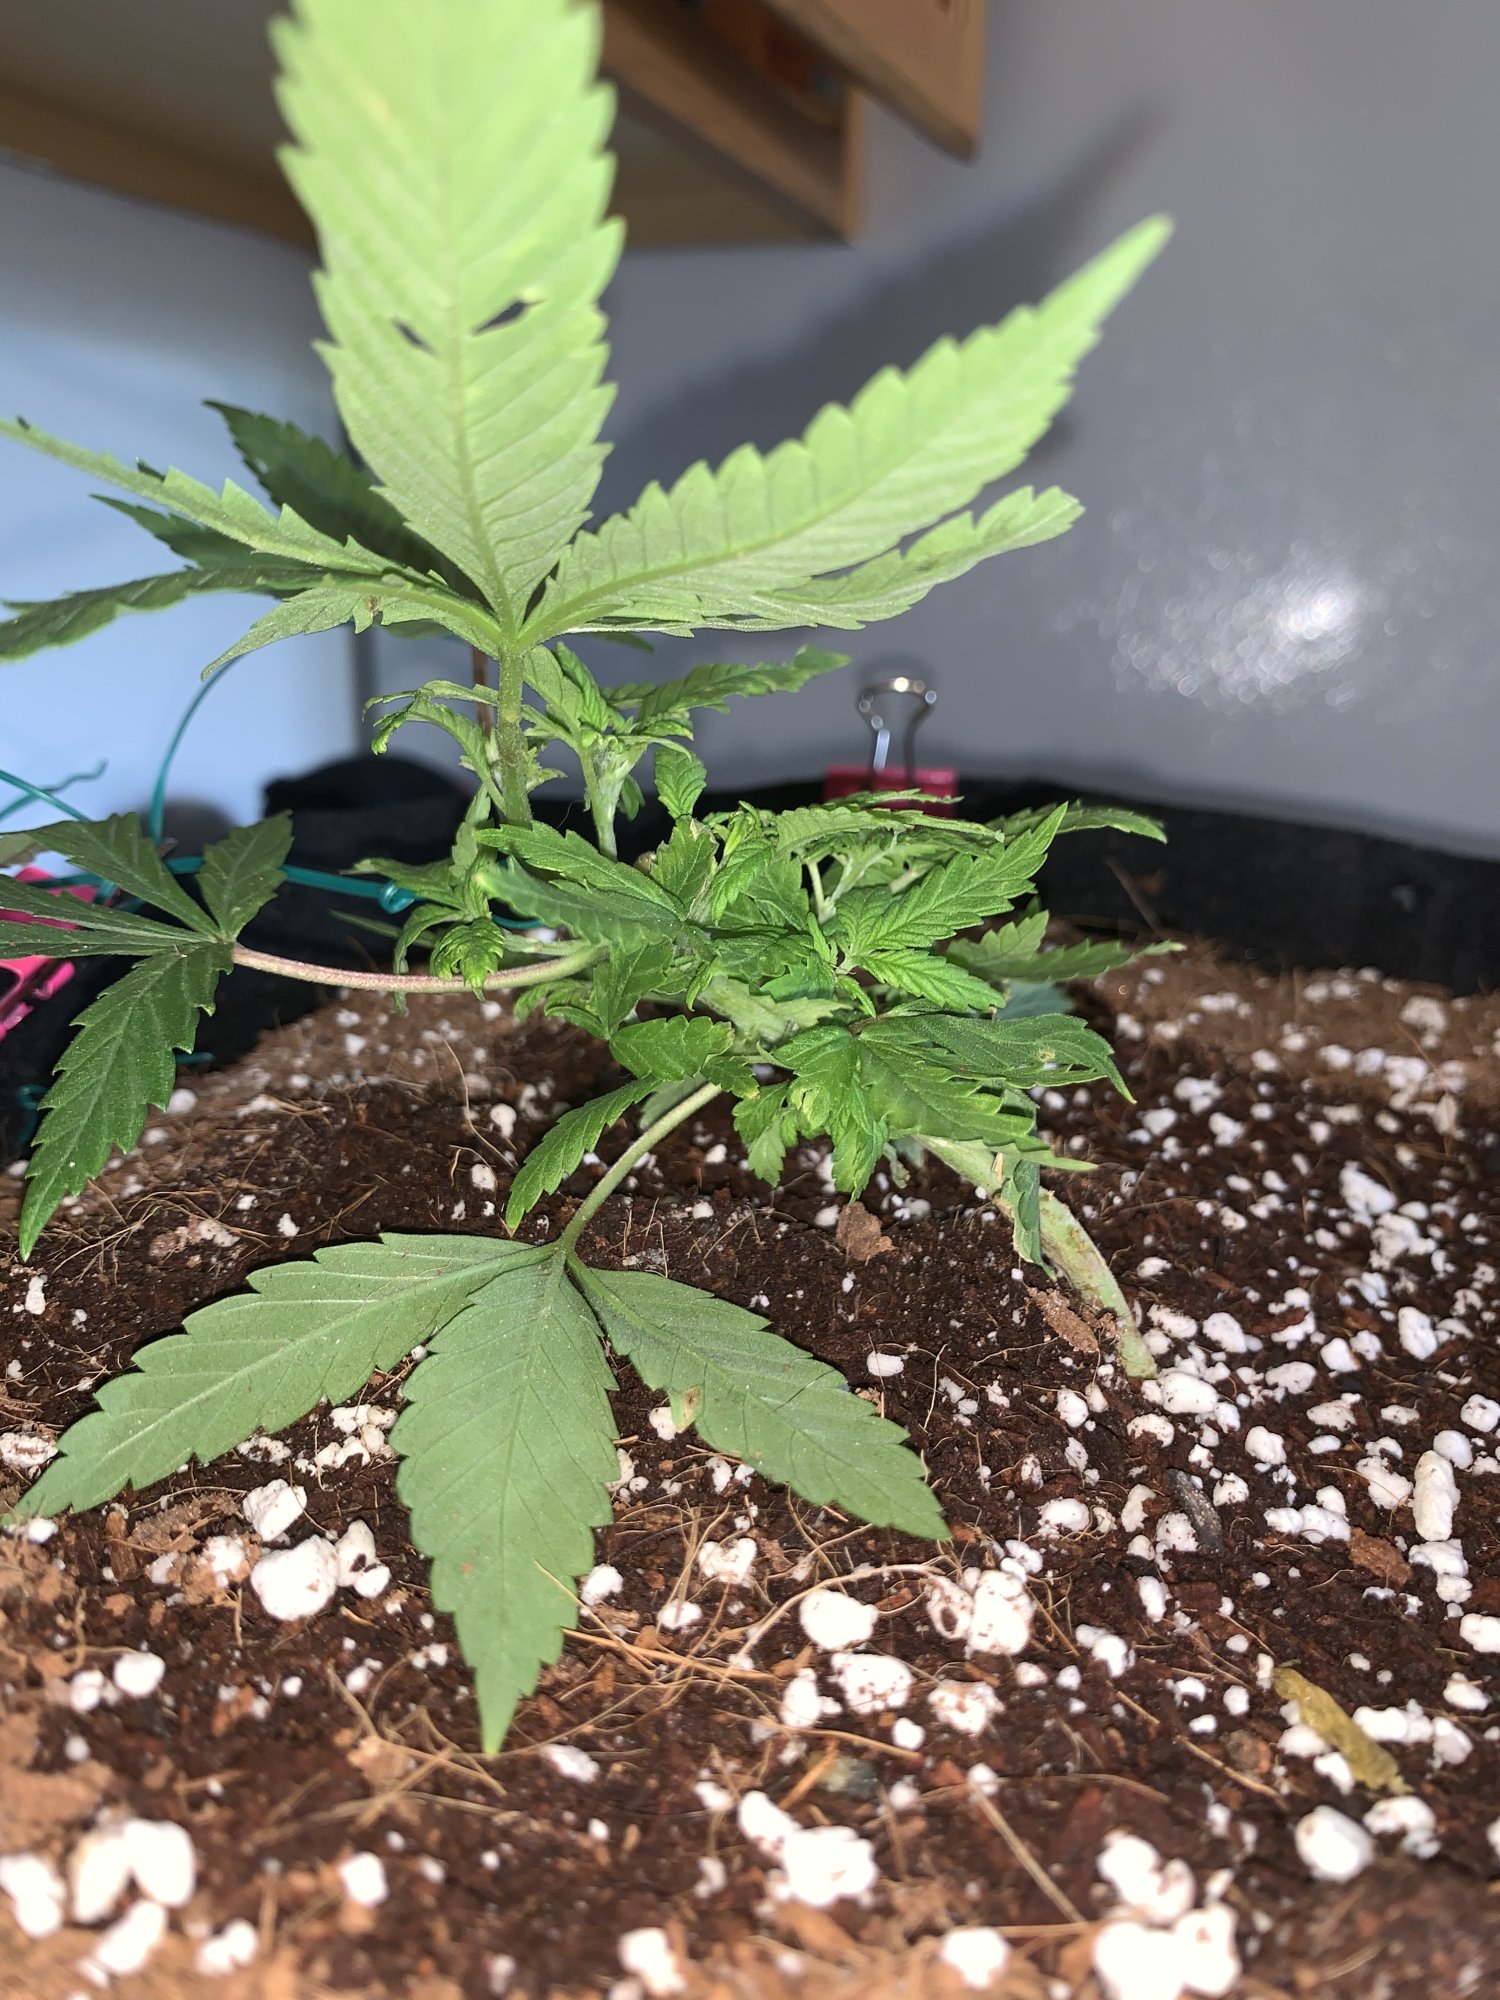 First time using coco coir first grow first hydroponic setup 5